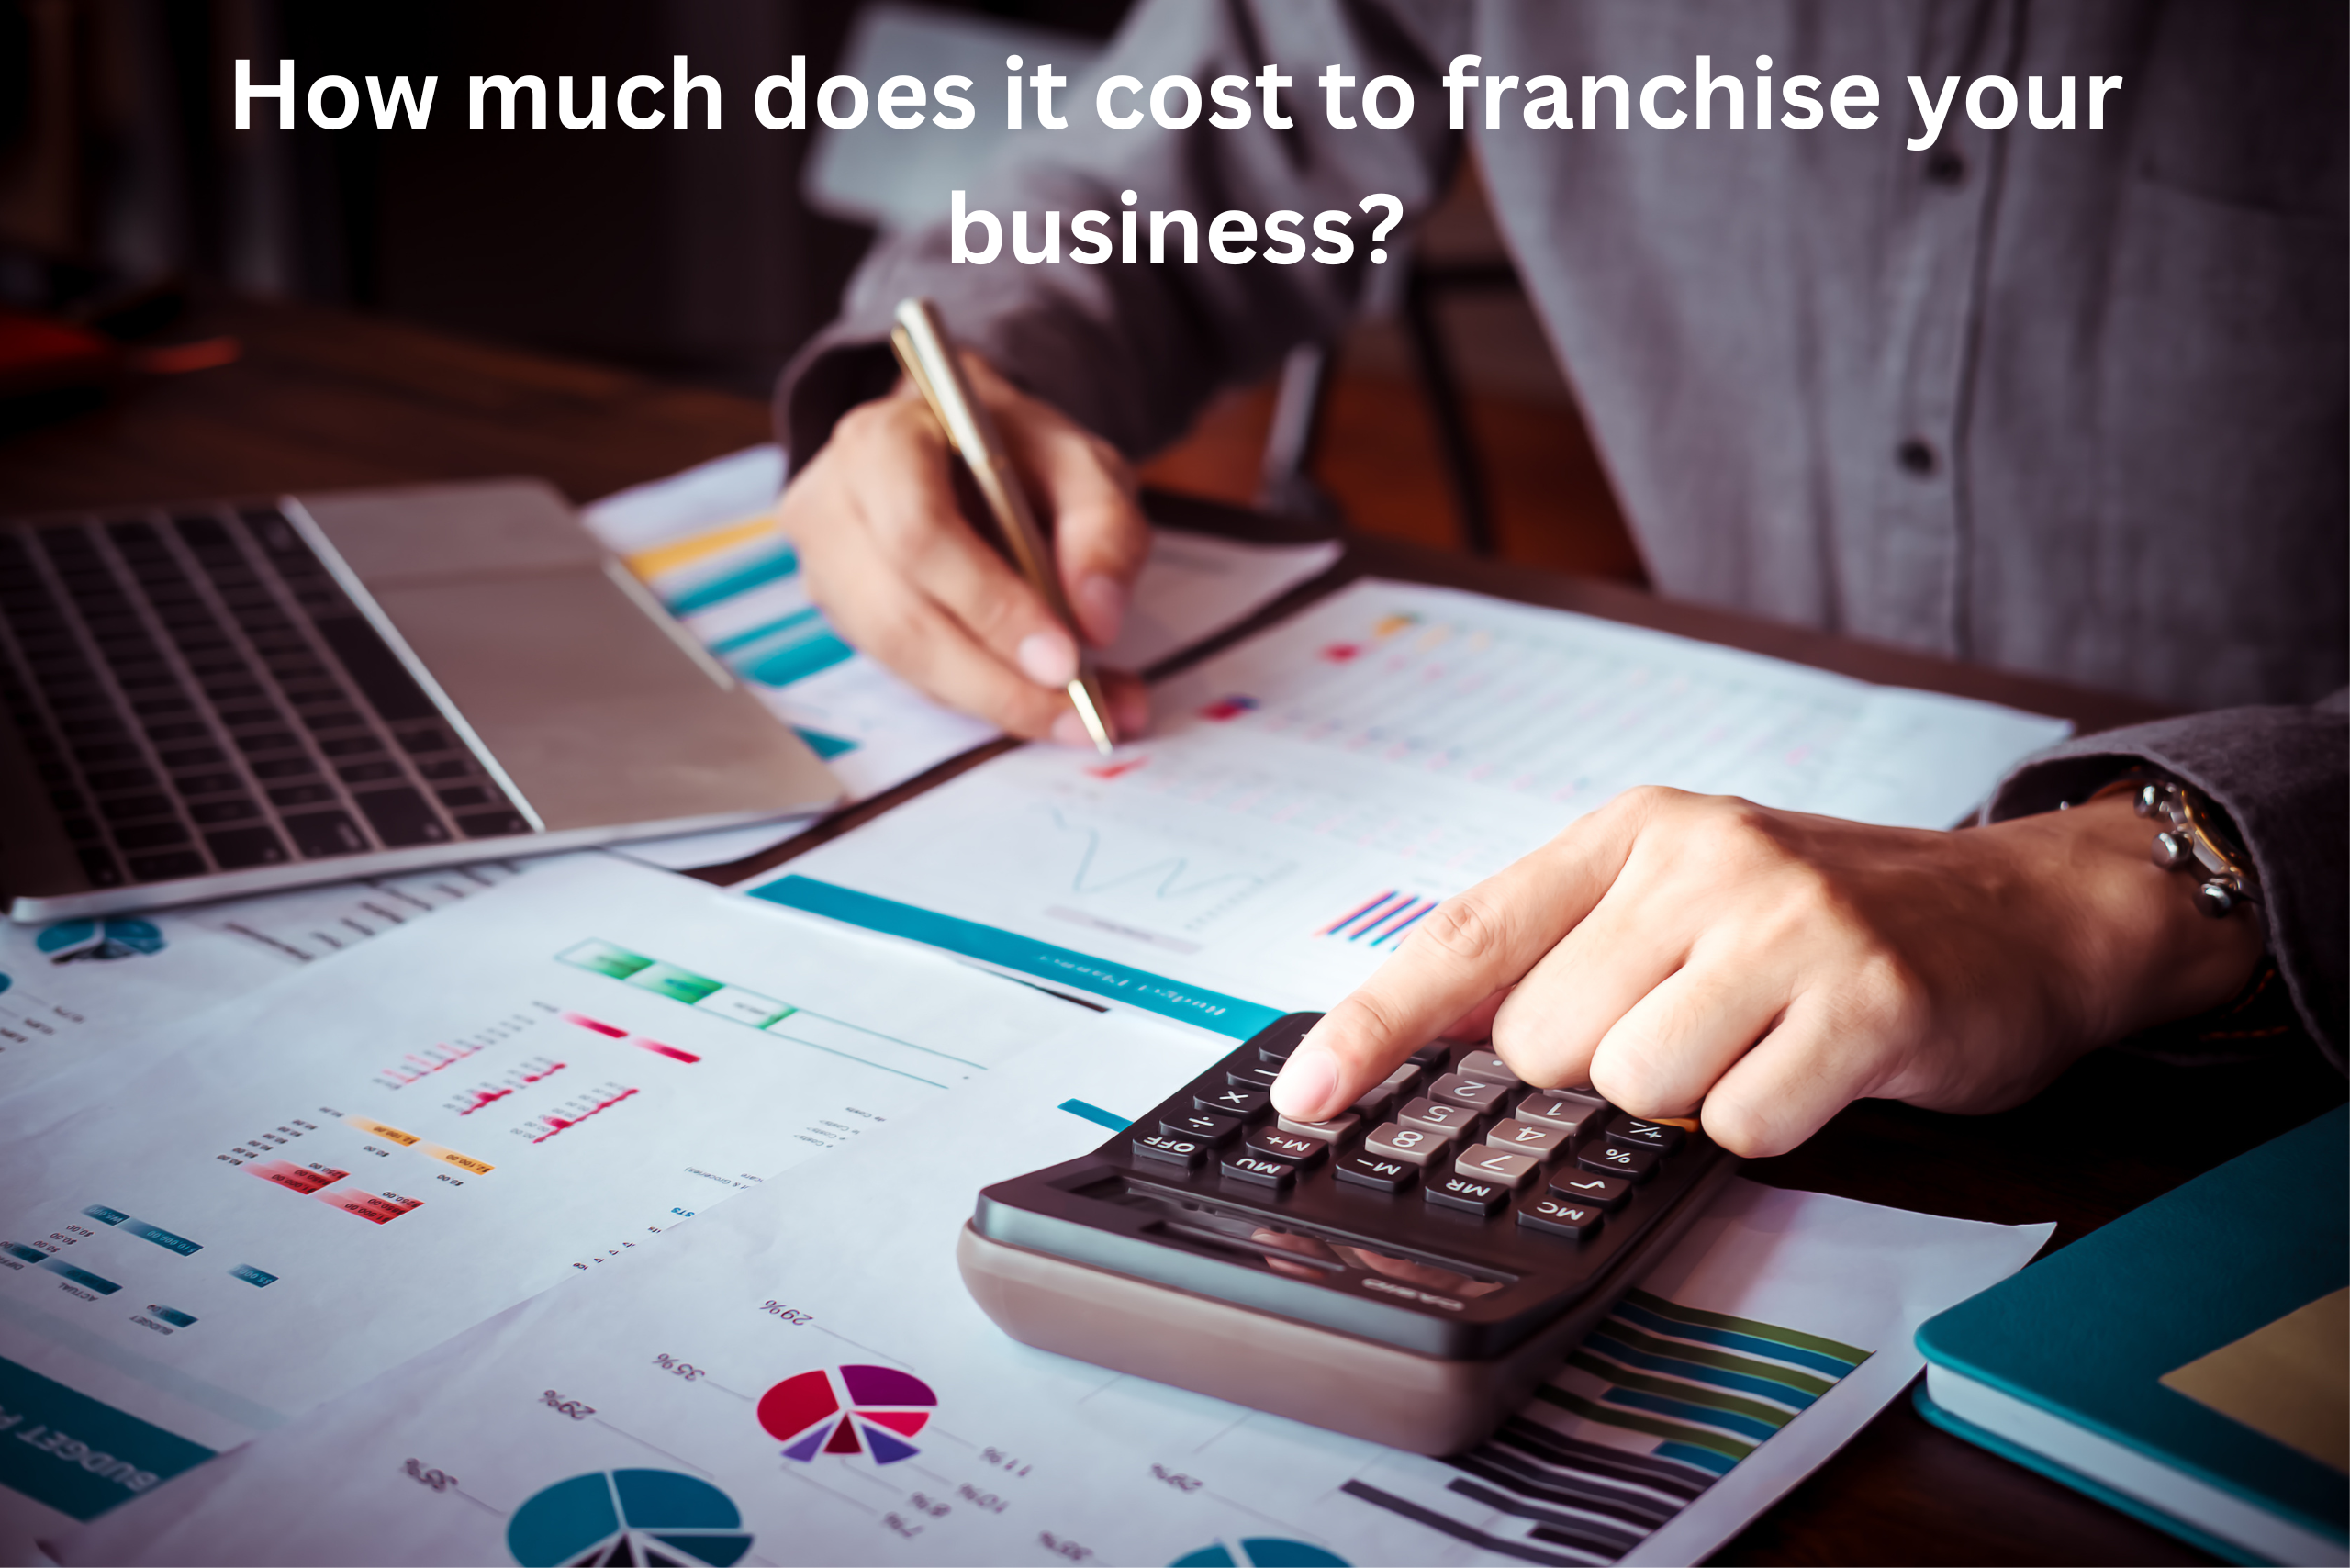 How much does it cost to franchise your business